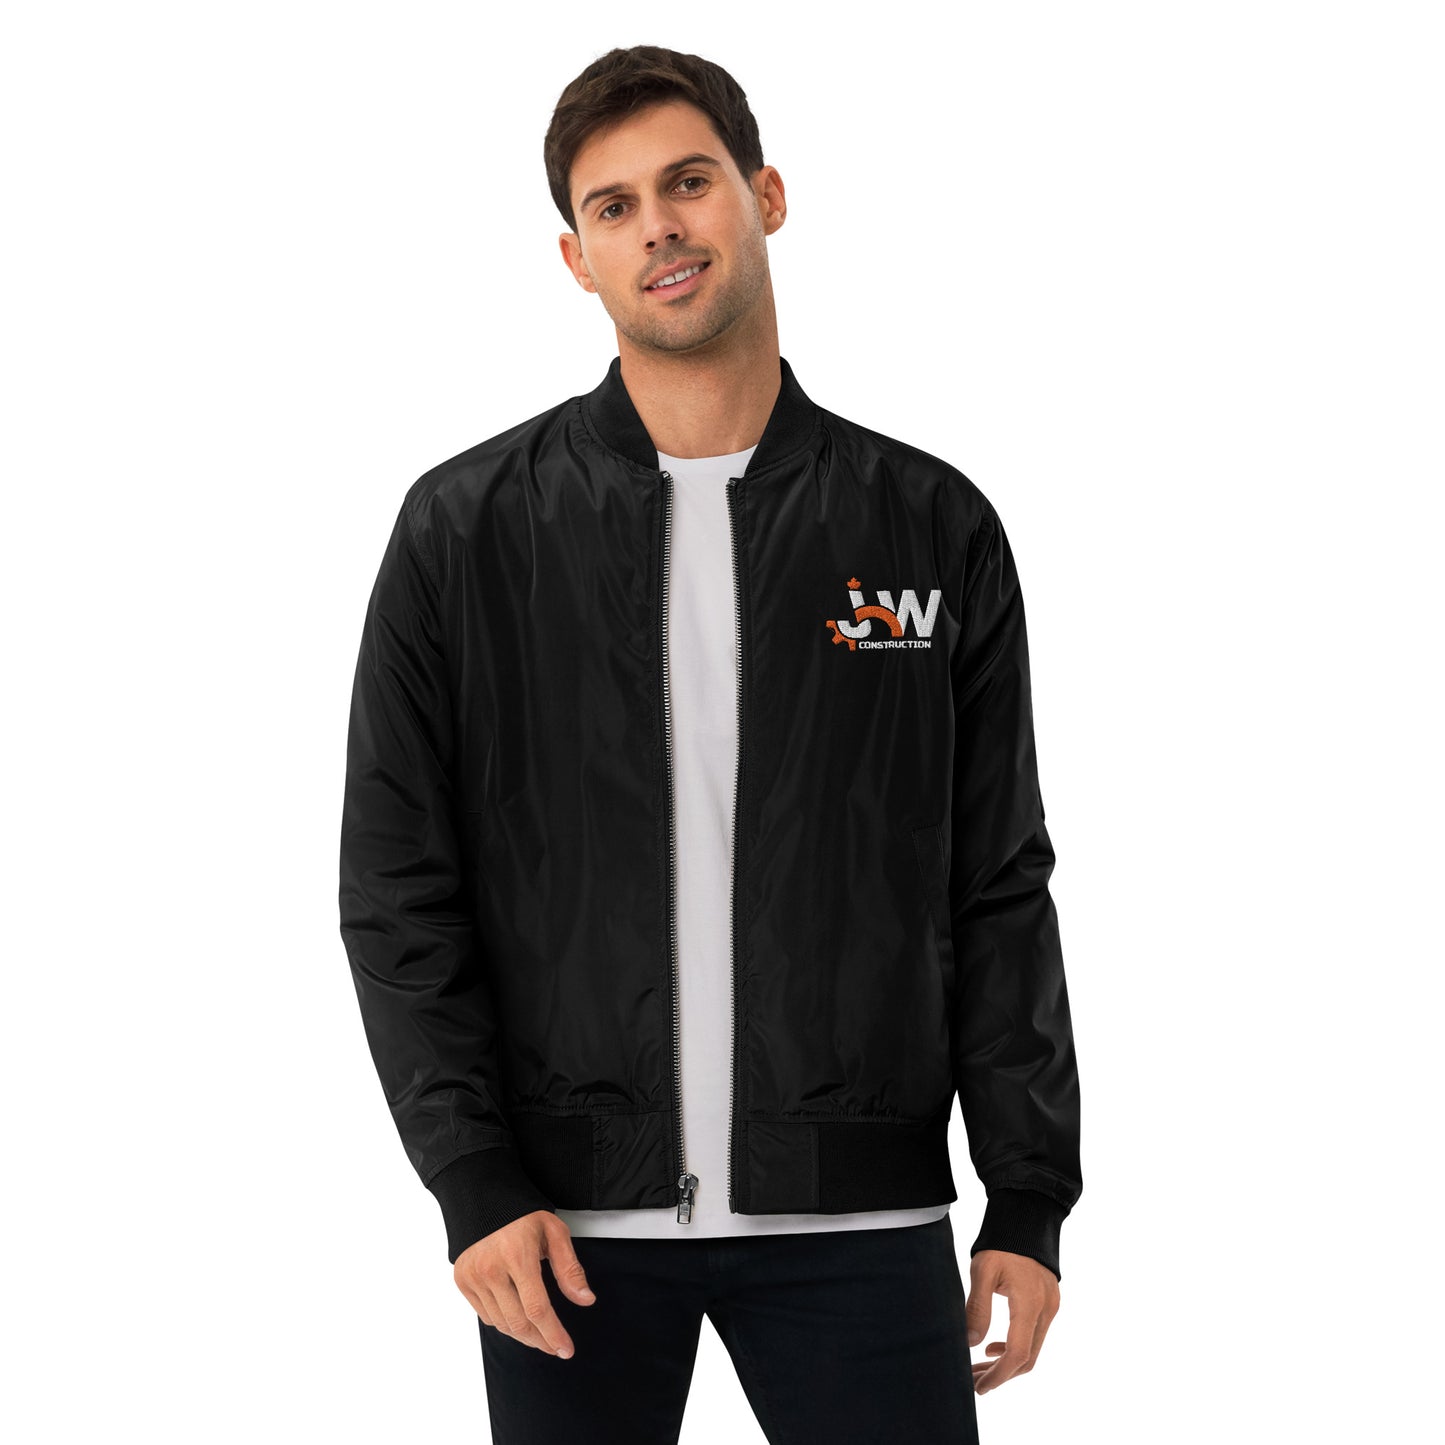 JHW Premium Bomber Jacket with Embroidery